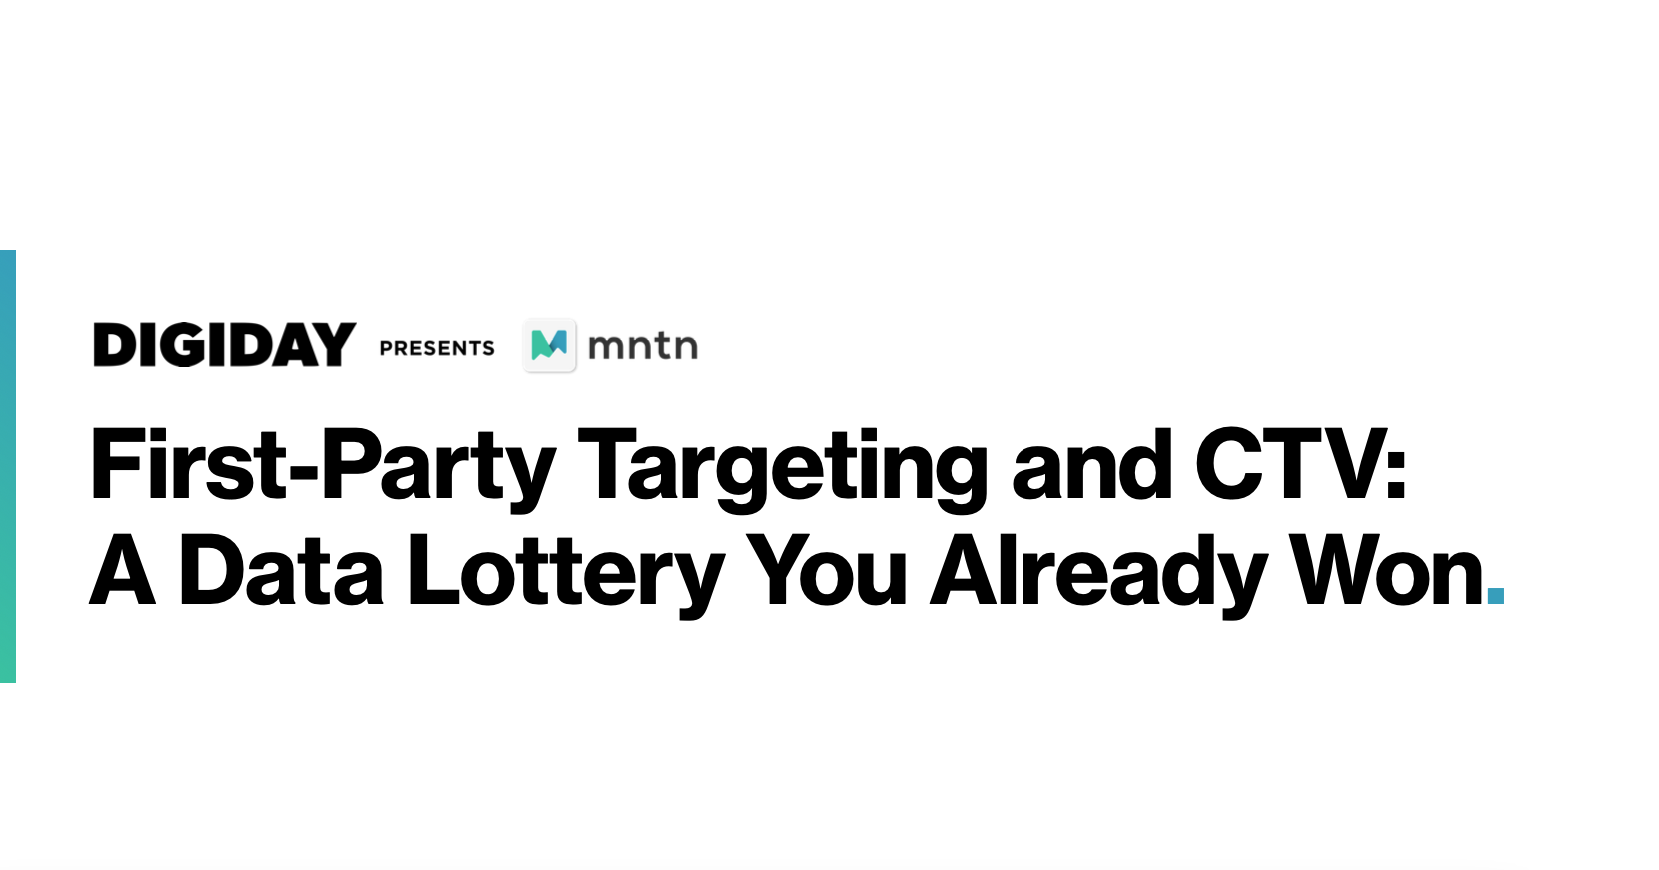 First-Party Targeting and CTV: The Audience-Data Lottery Brands Have Already Won